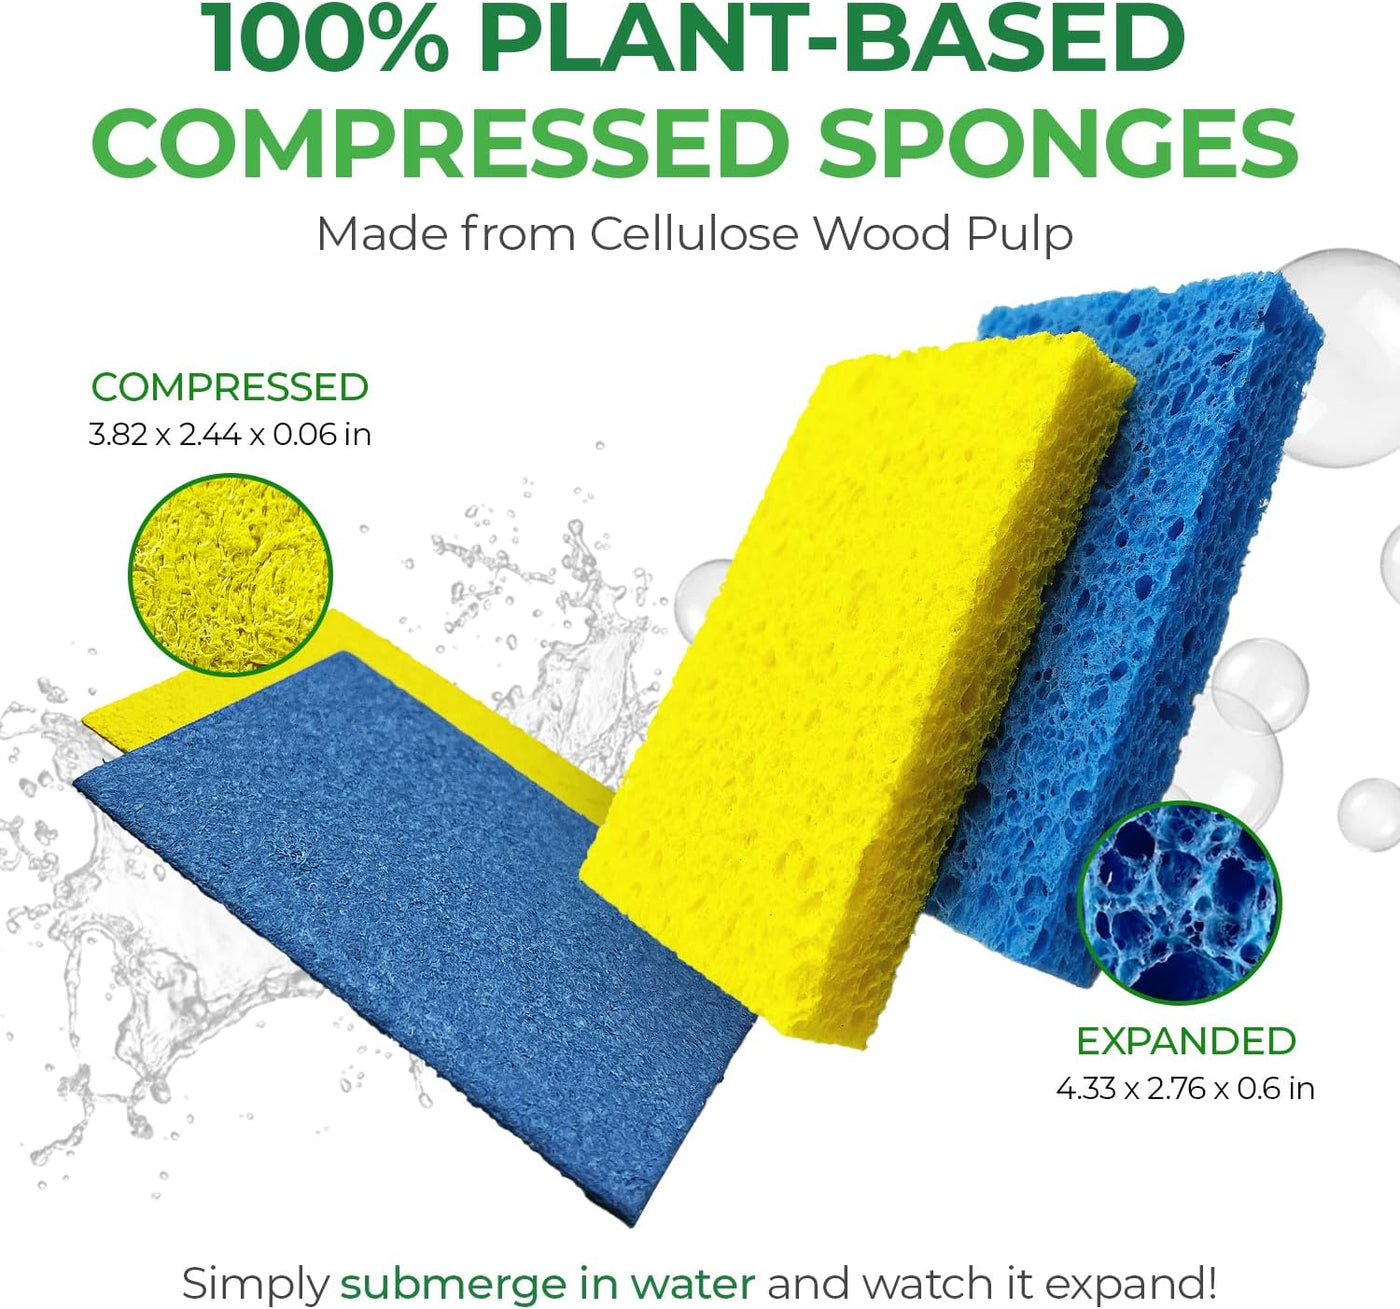 AIRNEX Biodegradable Cellulose Compressed Sponges - Kitchen Sponges for Cleaning - Heavy Duty and Natural Multipurpose Household Cleaning Sponges Good for Kitchen, Bathroom, and Surfaces